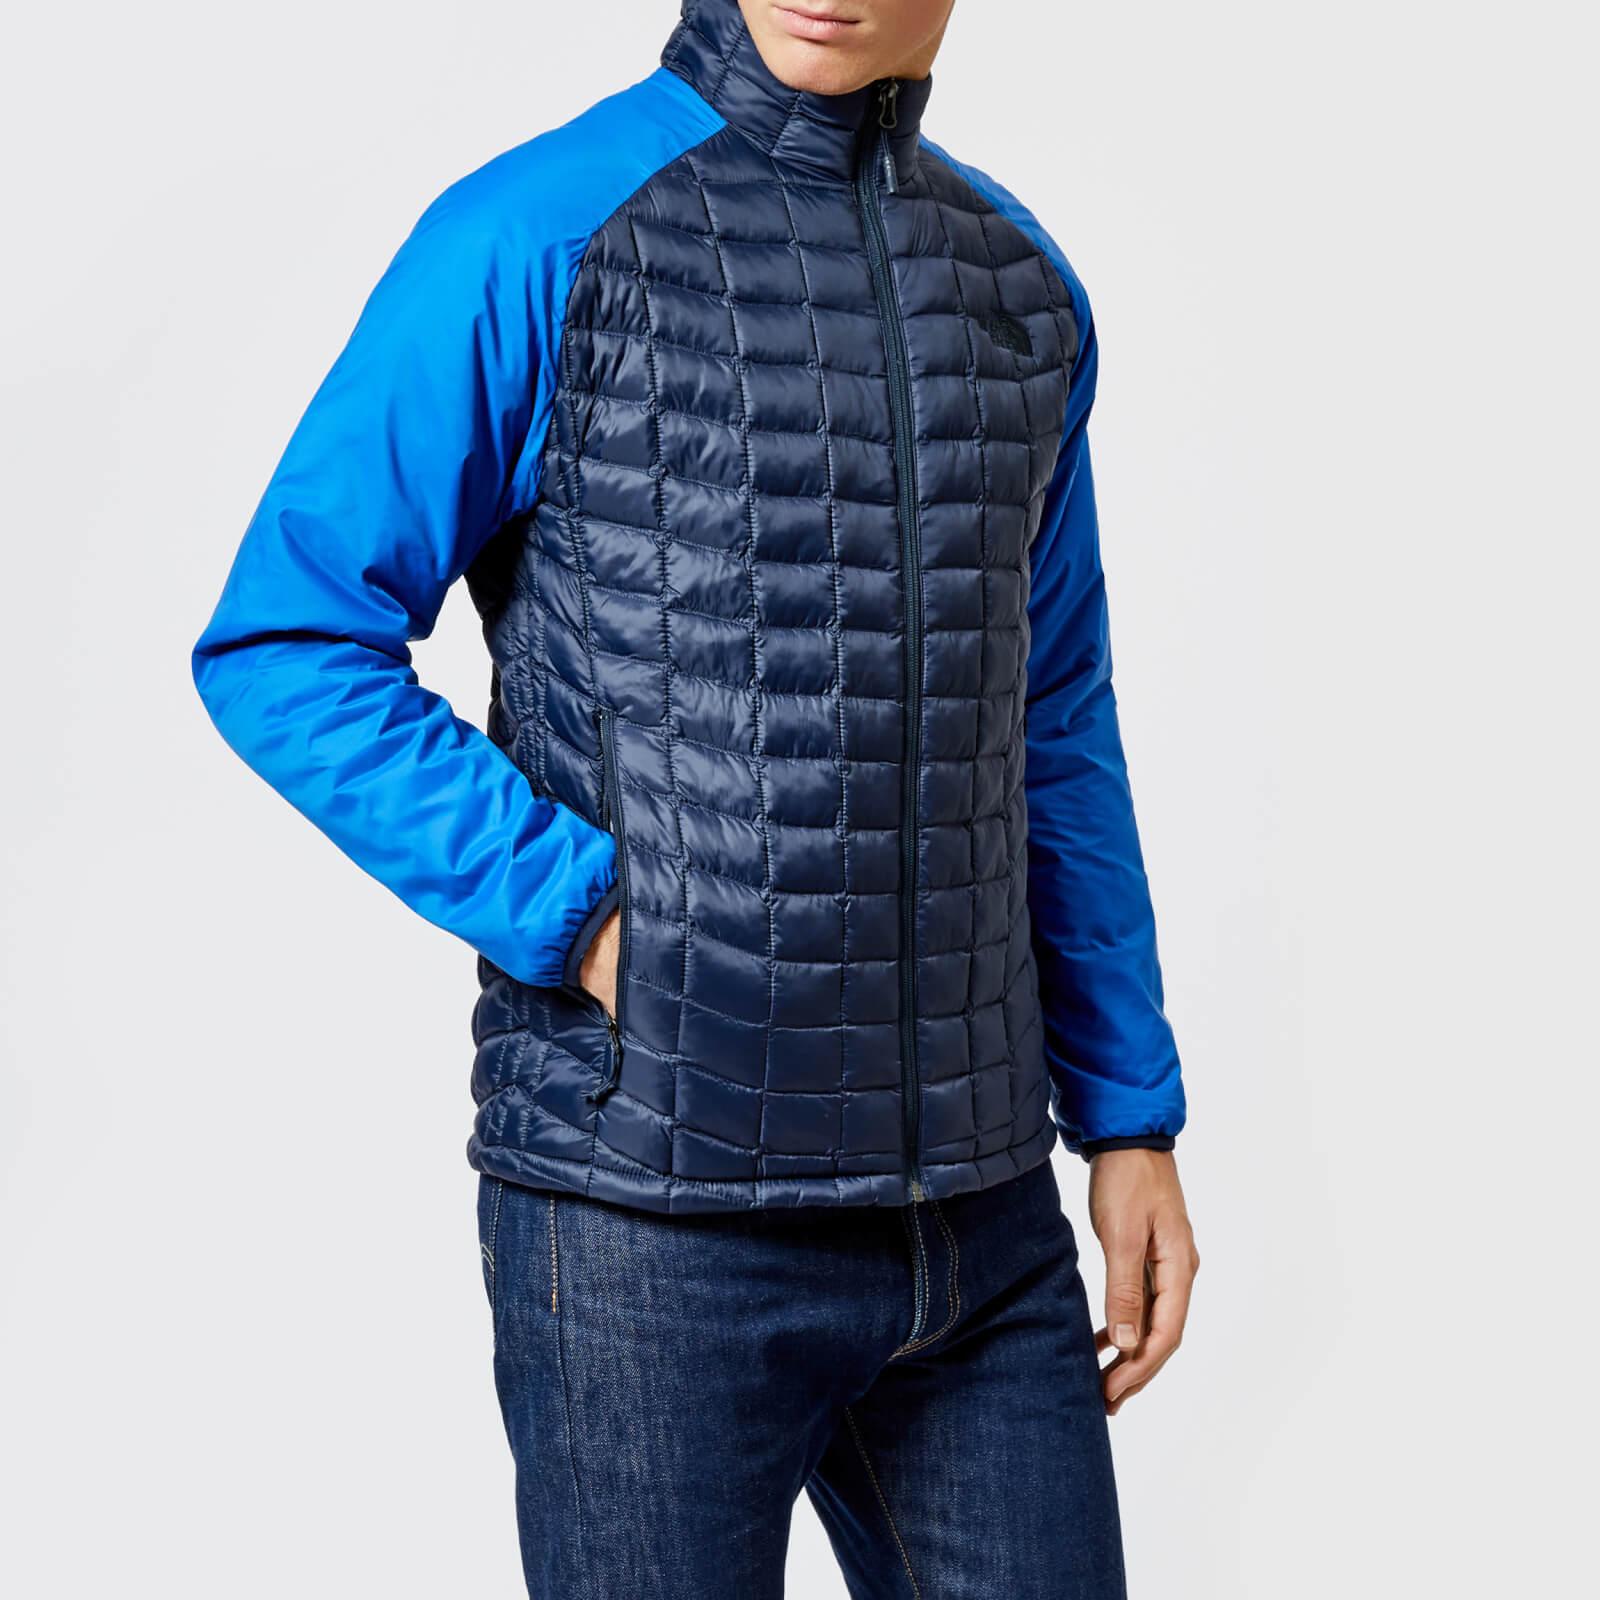 The North Face Synthetic Thermoball Sport Jacket in Blue for Men - Lyst